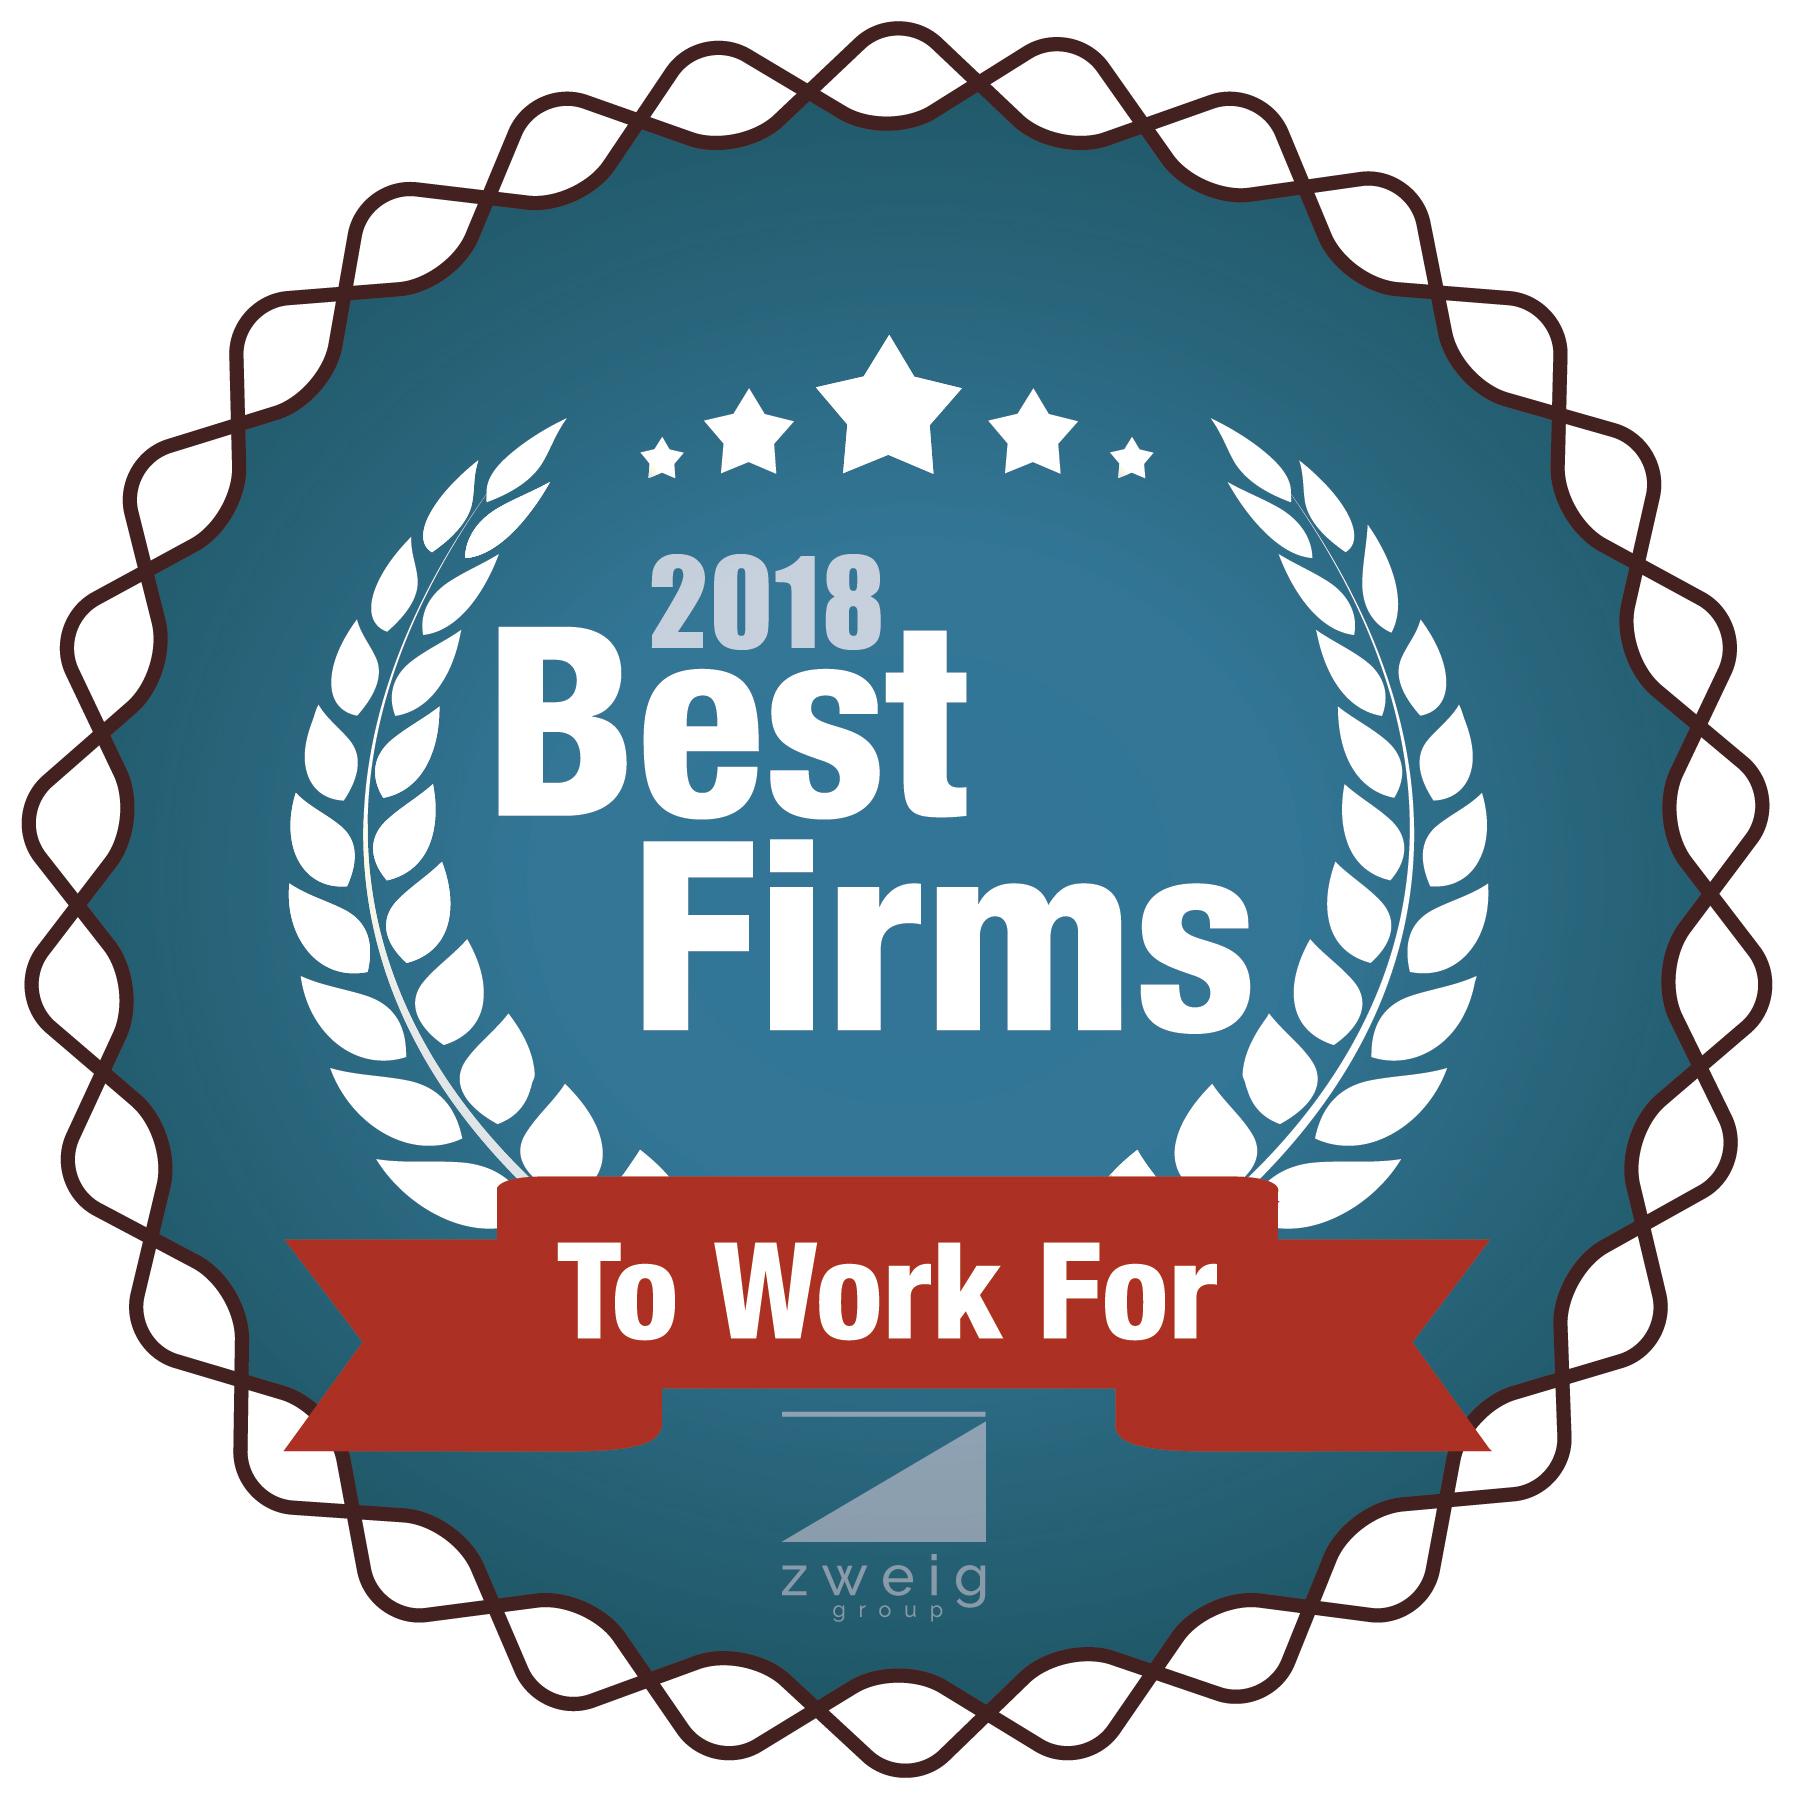 CEI Ranks #3 Best Firm to Work For - Environmental Services